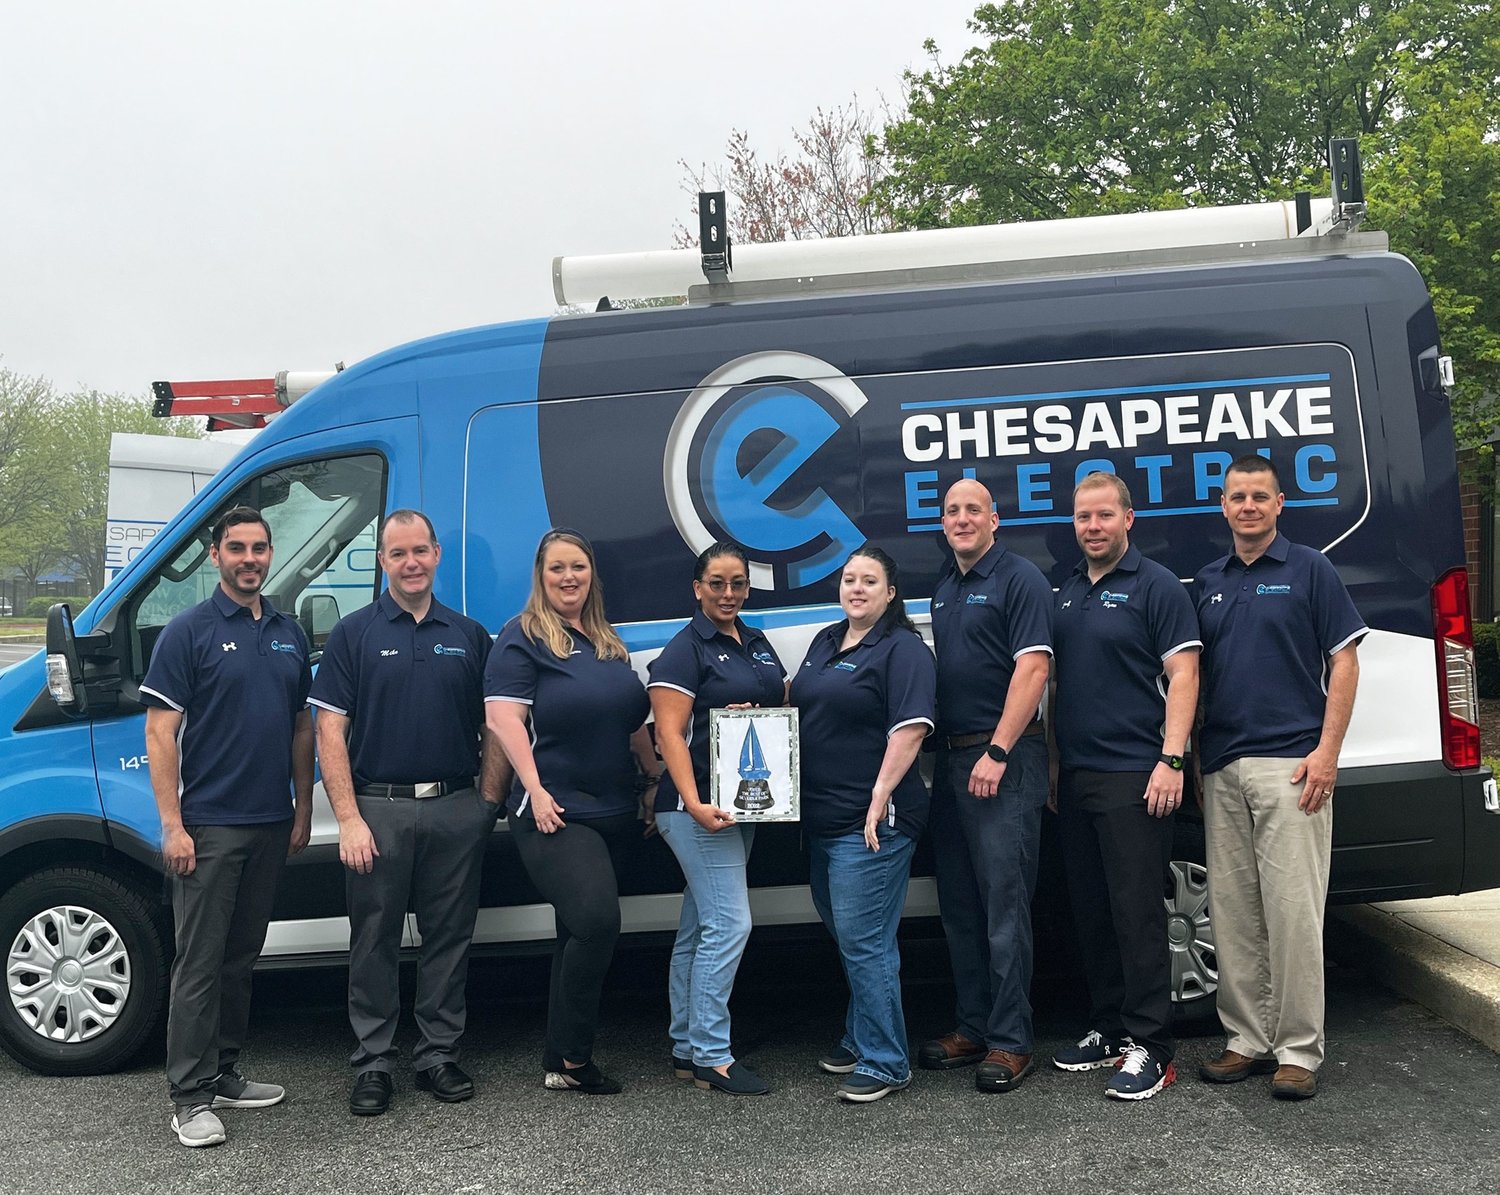 Best Home Service Outside Severna Park went to Chesapeake Electric.